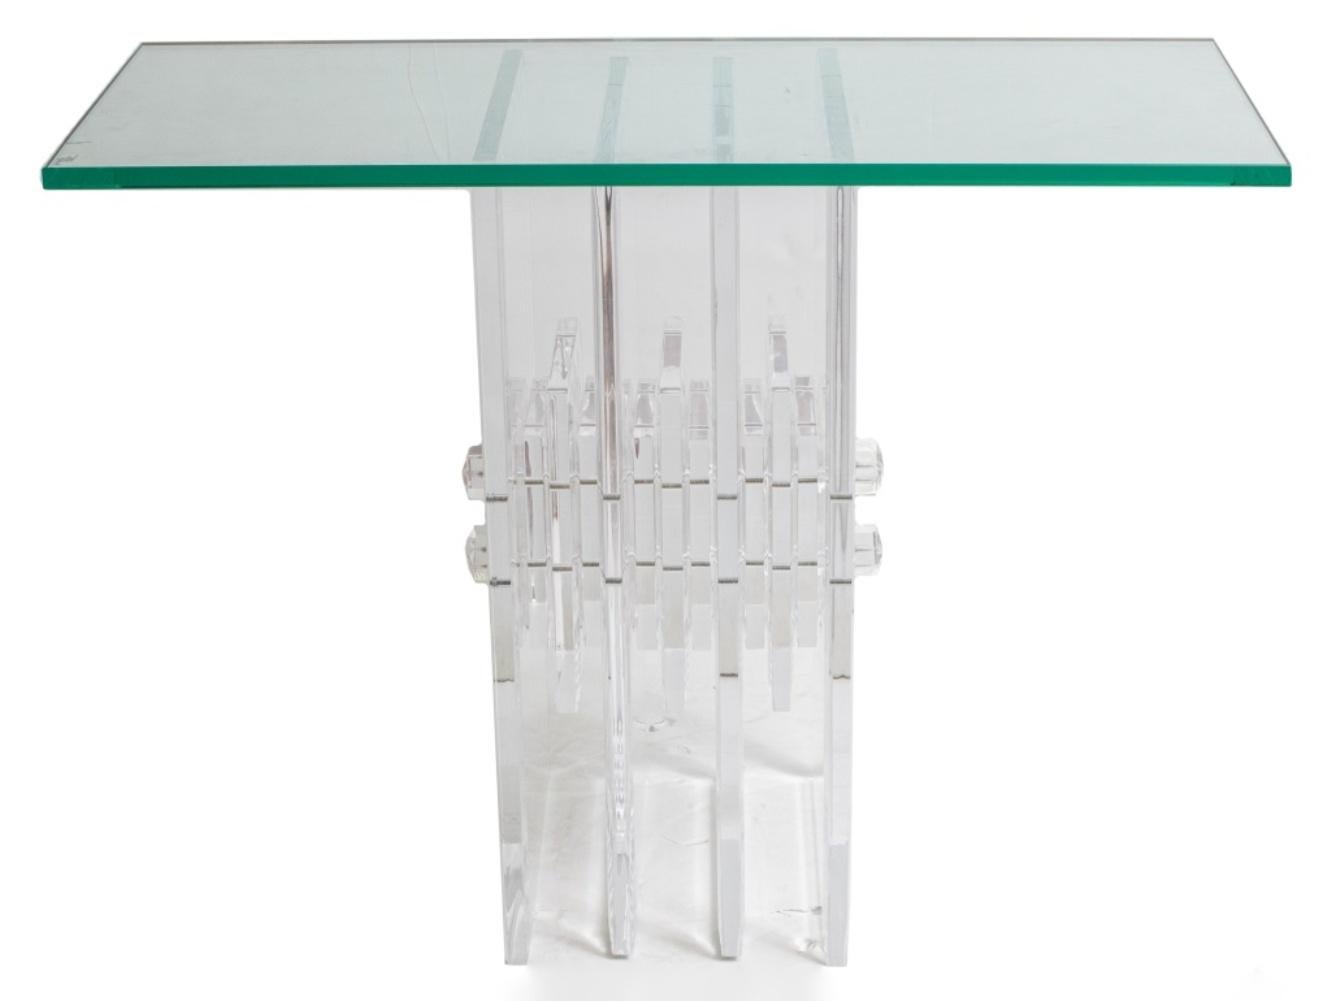 Mid-Century Modern style glass and lucite console in the Karl Springer (German/American, 1931-1991) manner, with a rectangular glass top above the horizontally stacked and conjoined lucite block base. In good condition. Wear consistent with age and